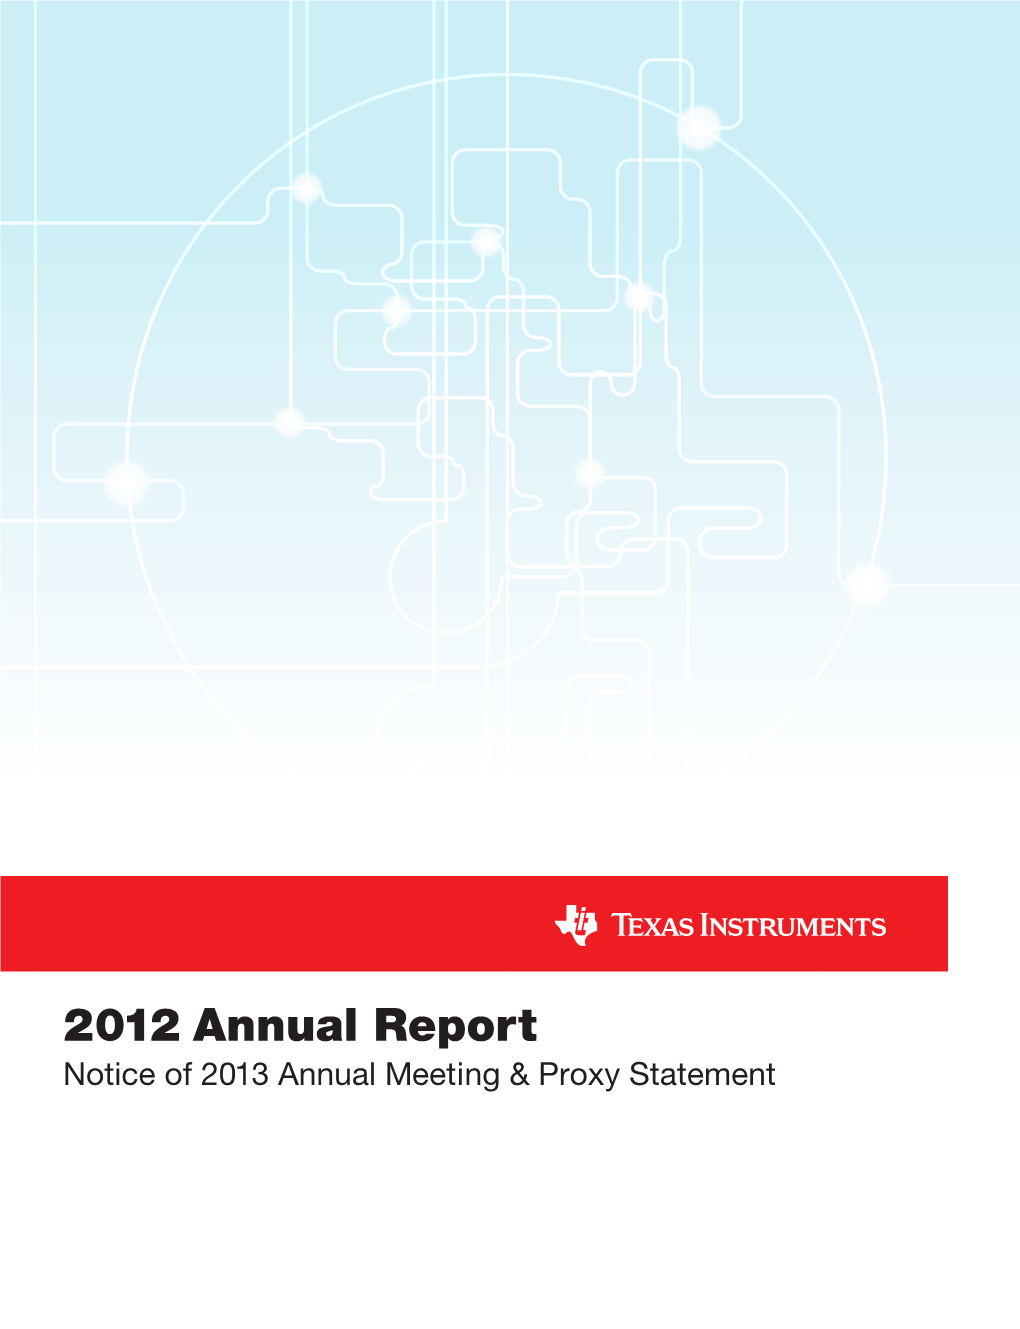 2012 Annual Report Notice of 2013 Annual Meeting & Proxy Statement